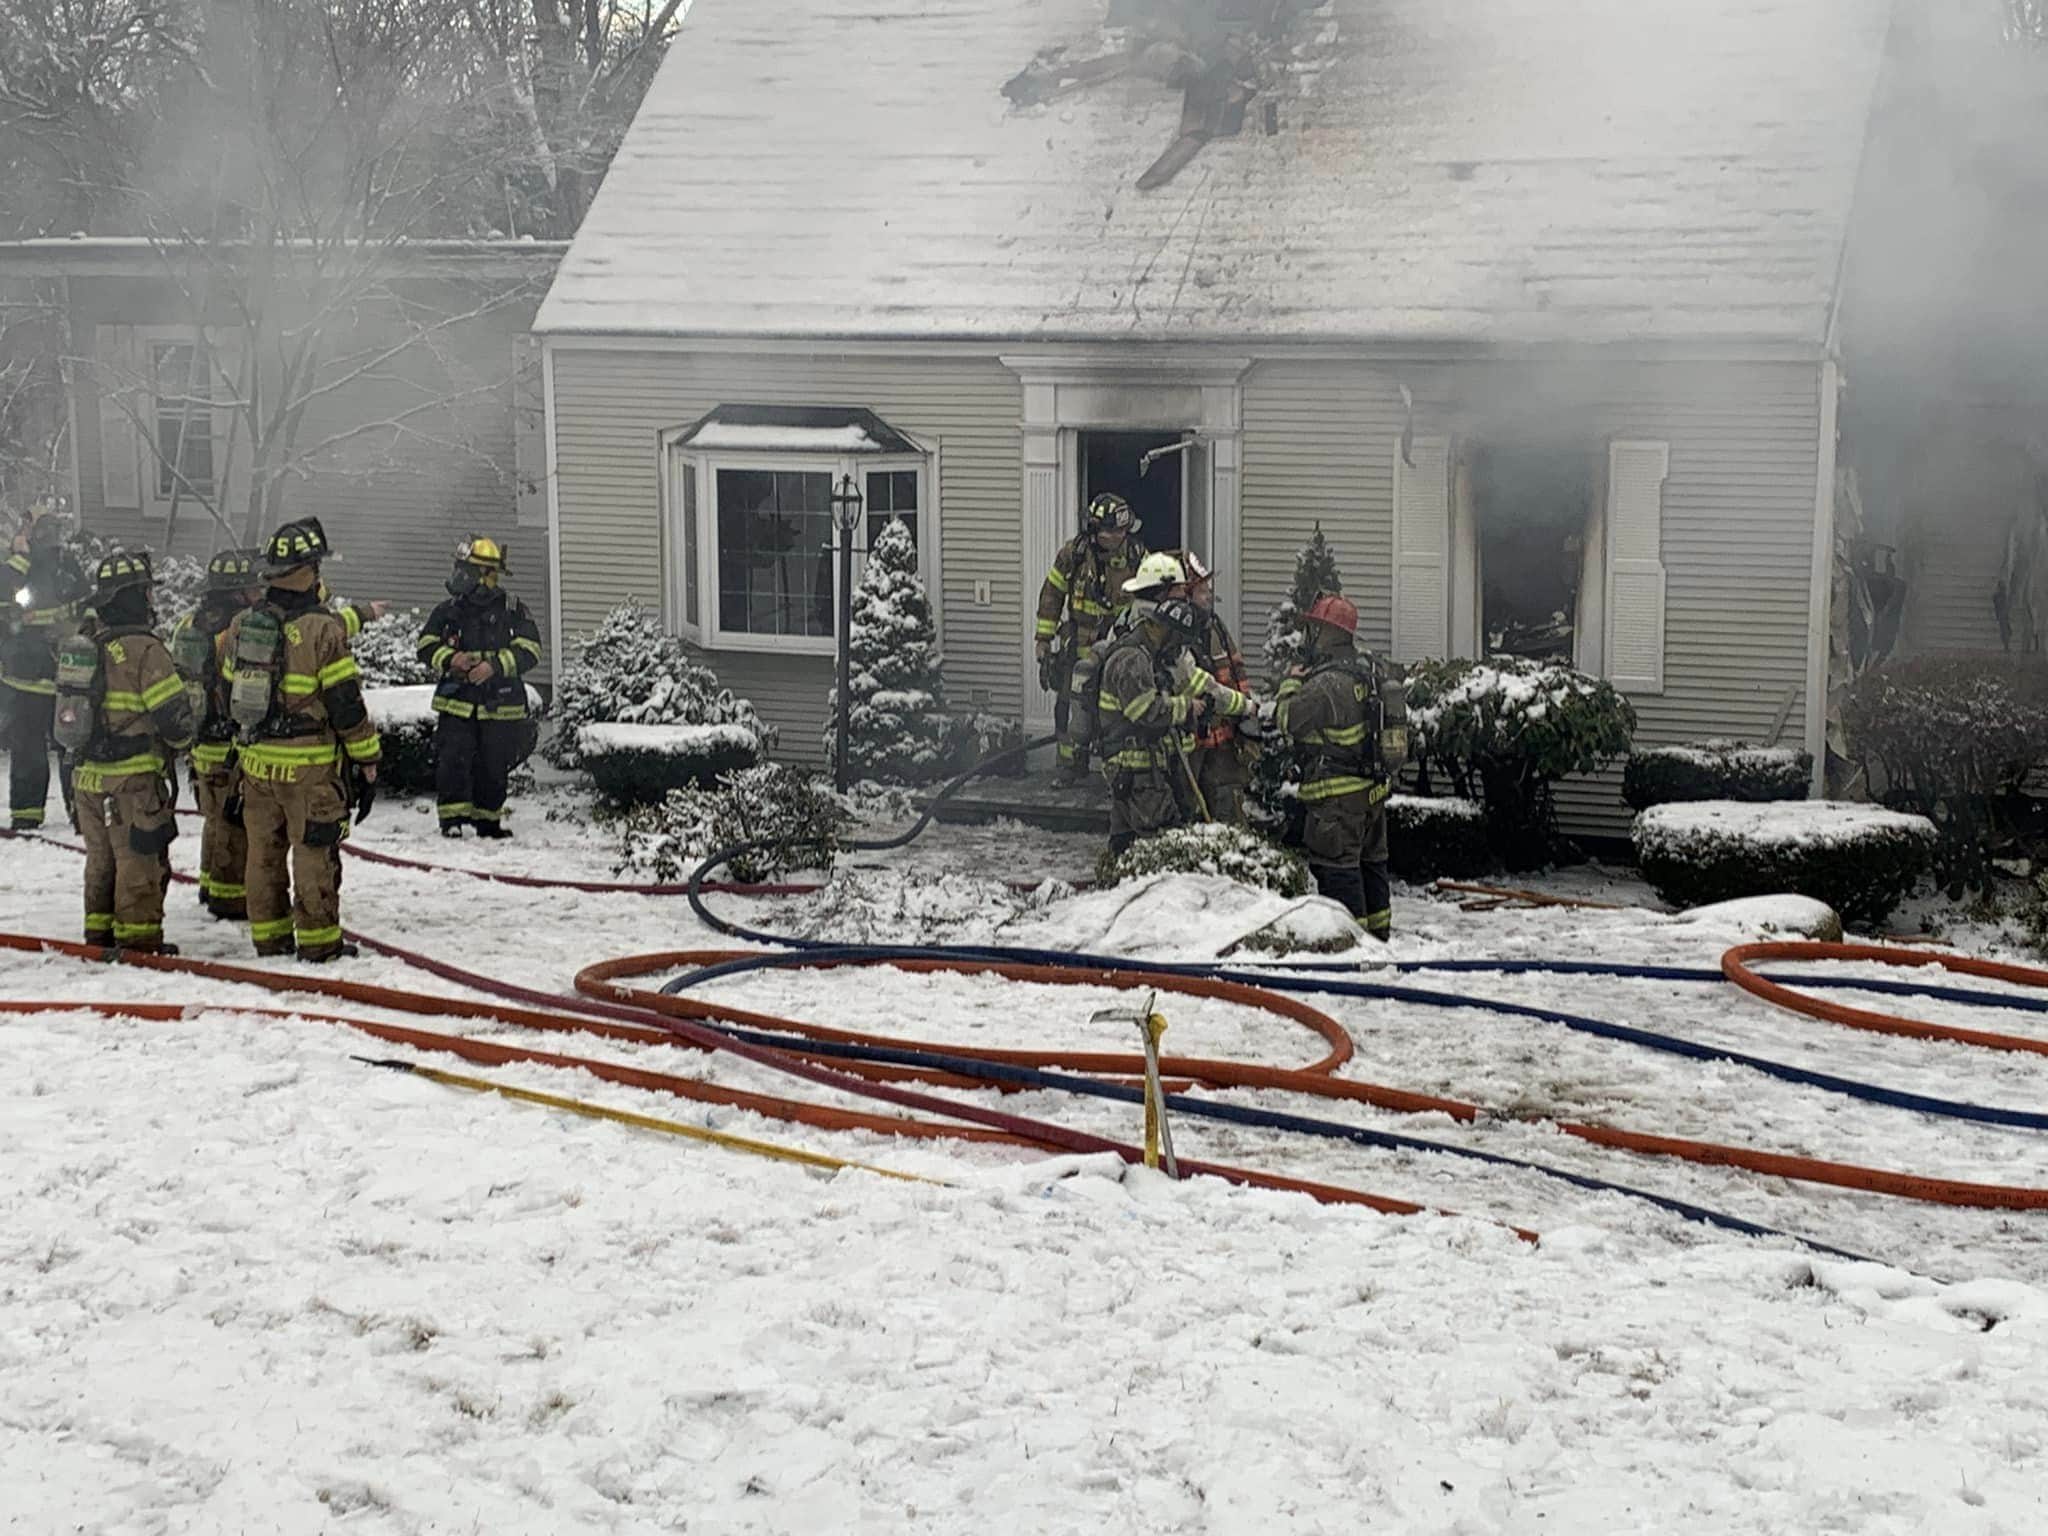 Firefighters respond to house fire on Adams Street